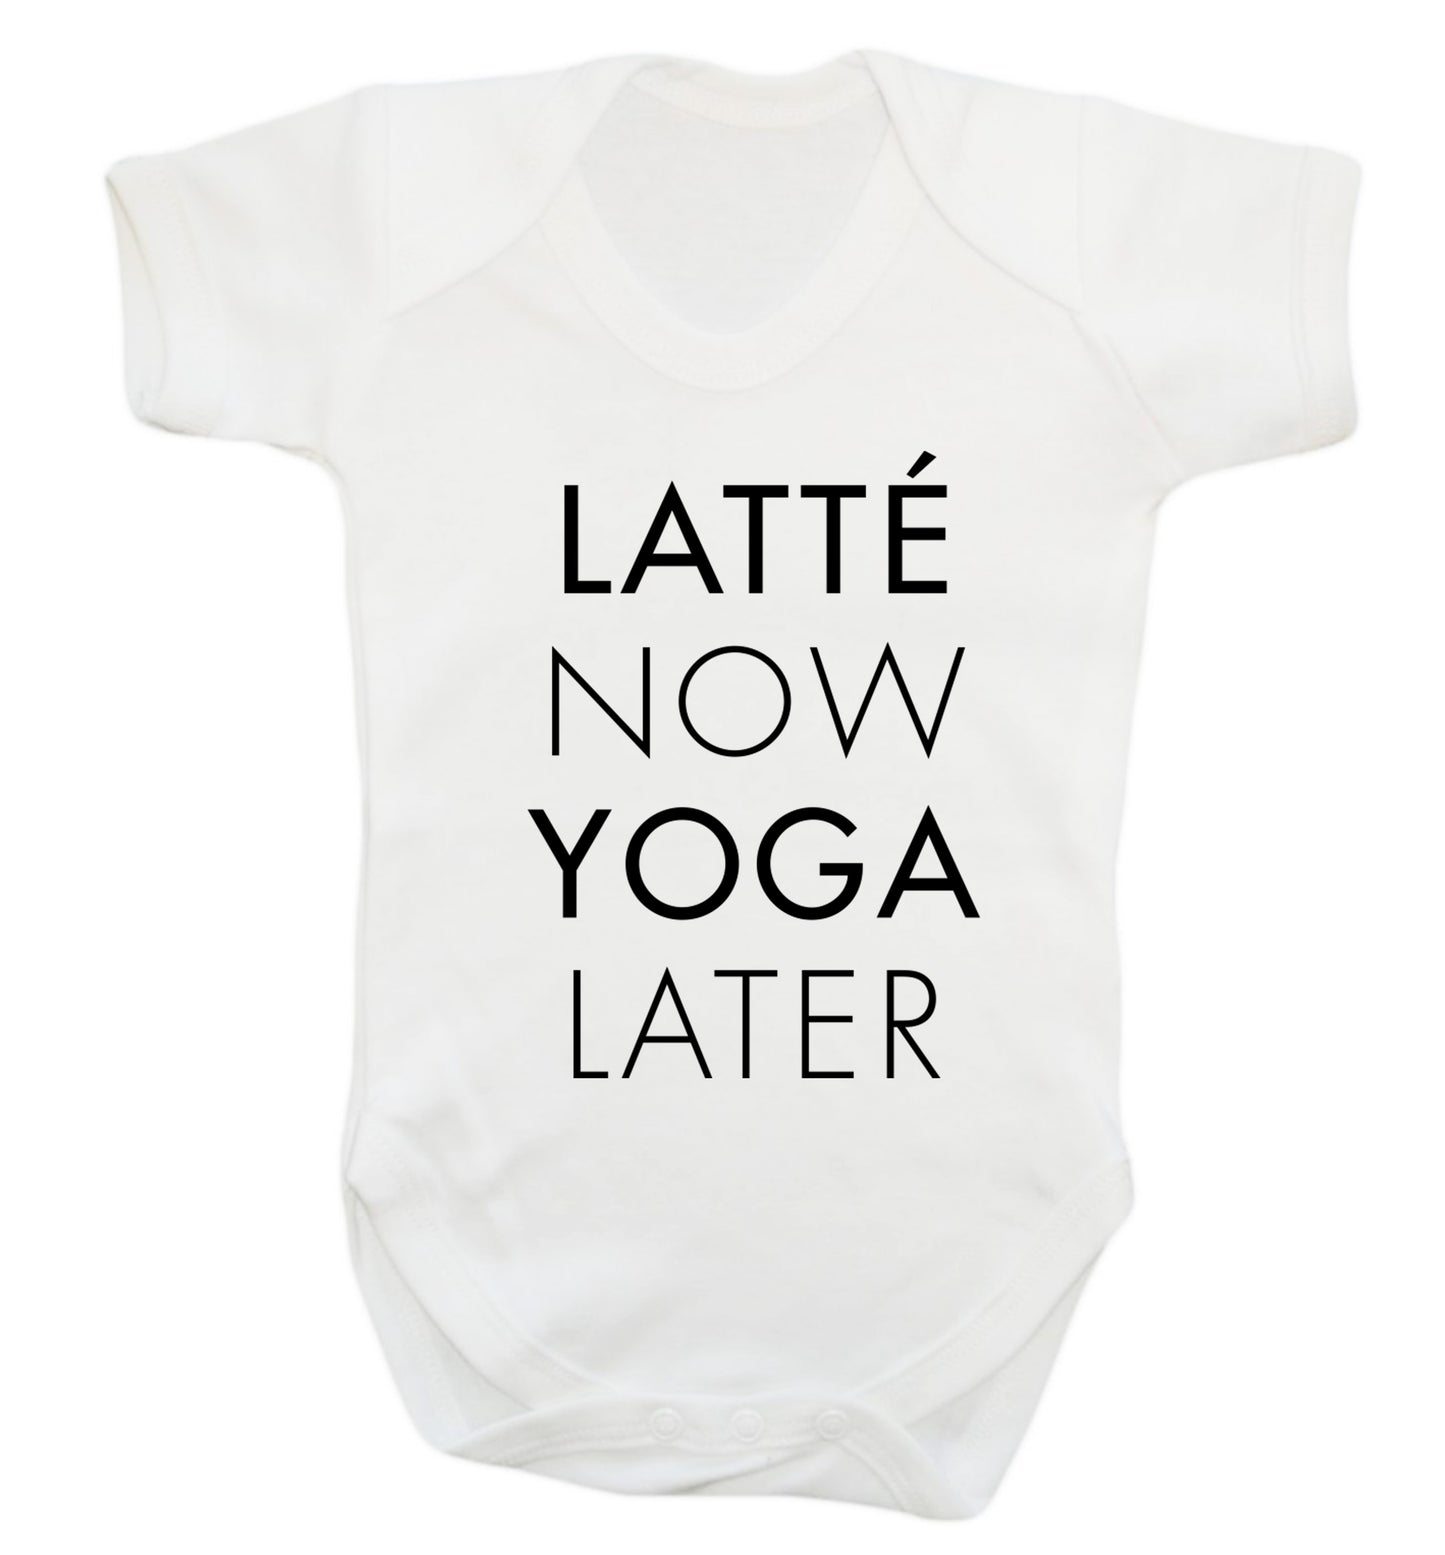 Latte now yoga later Baby Vest white 18-24 months